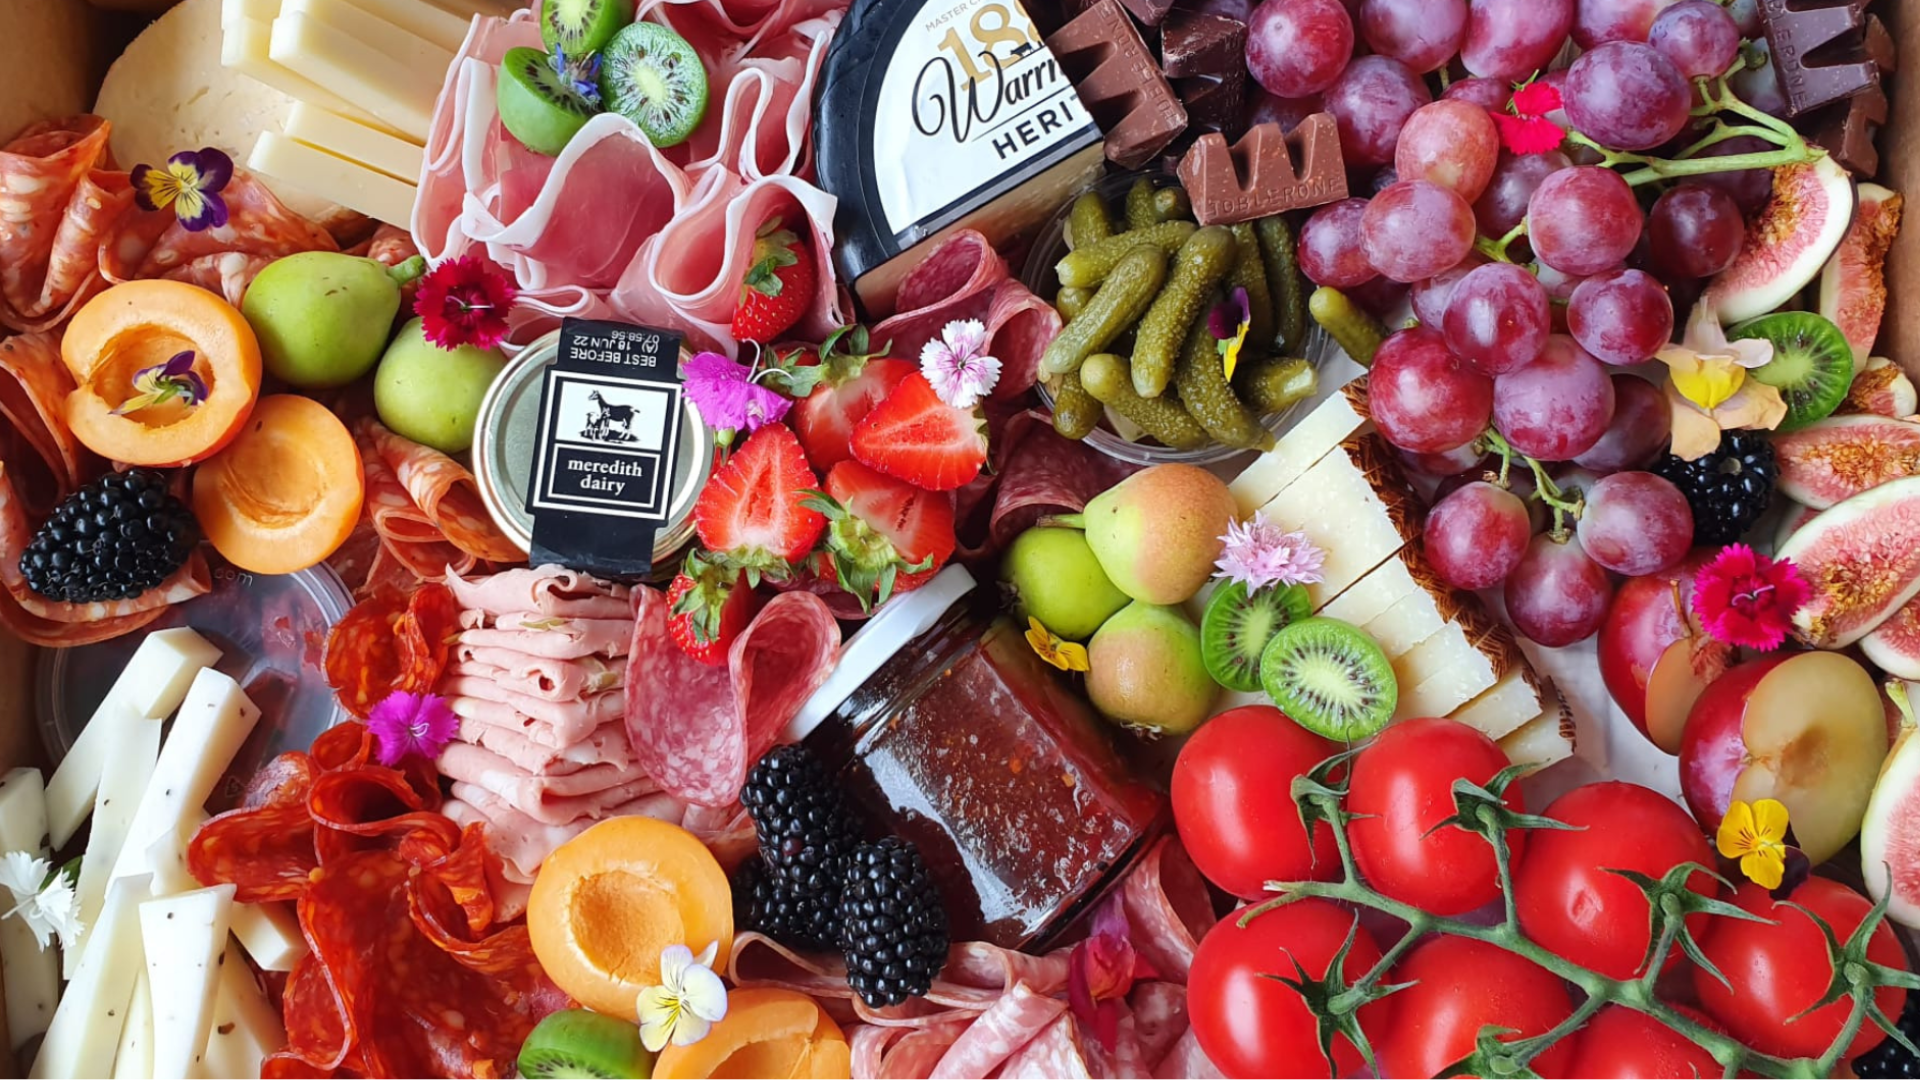 The Cooks Larder curate gourmet grazing for event catering in Sydney. Contact us today to discuss your special occasion and party catering today!